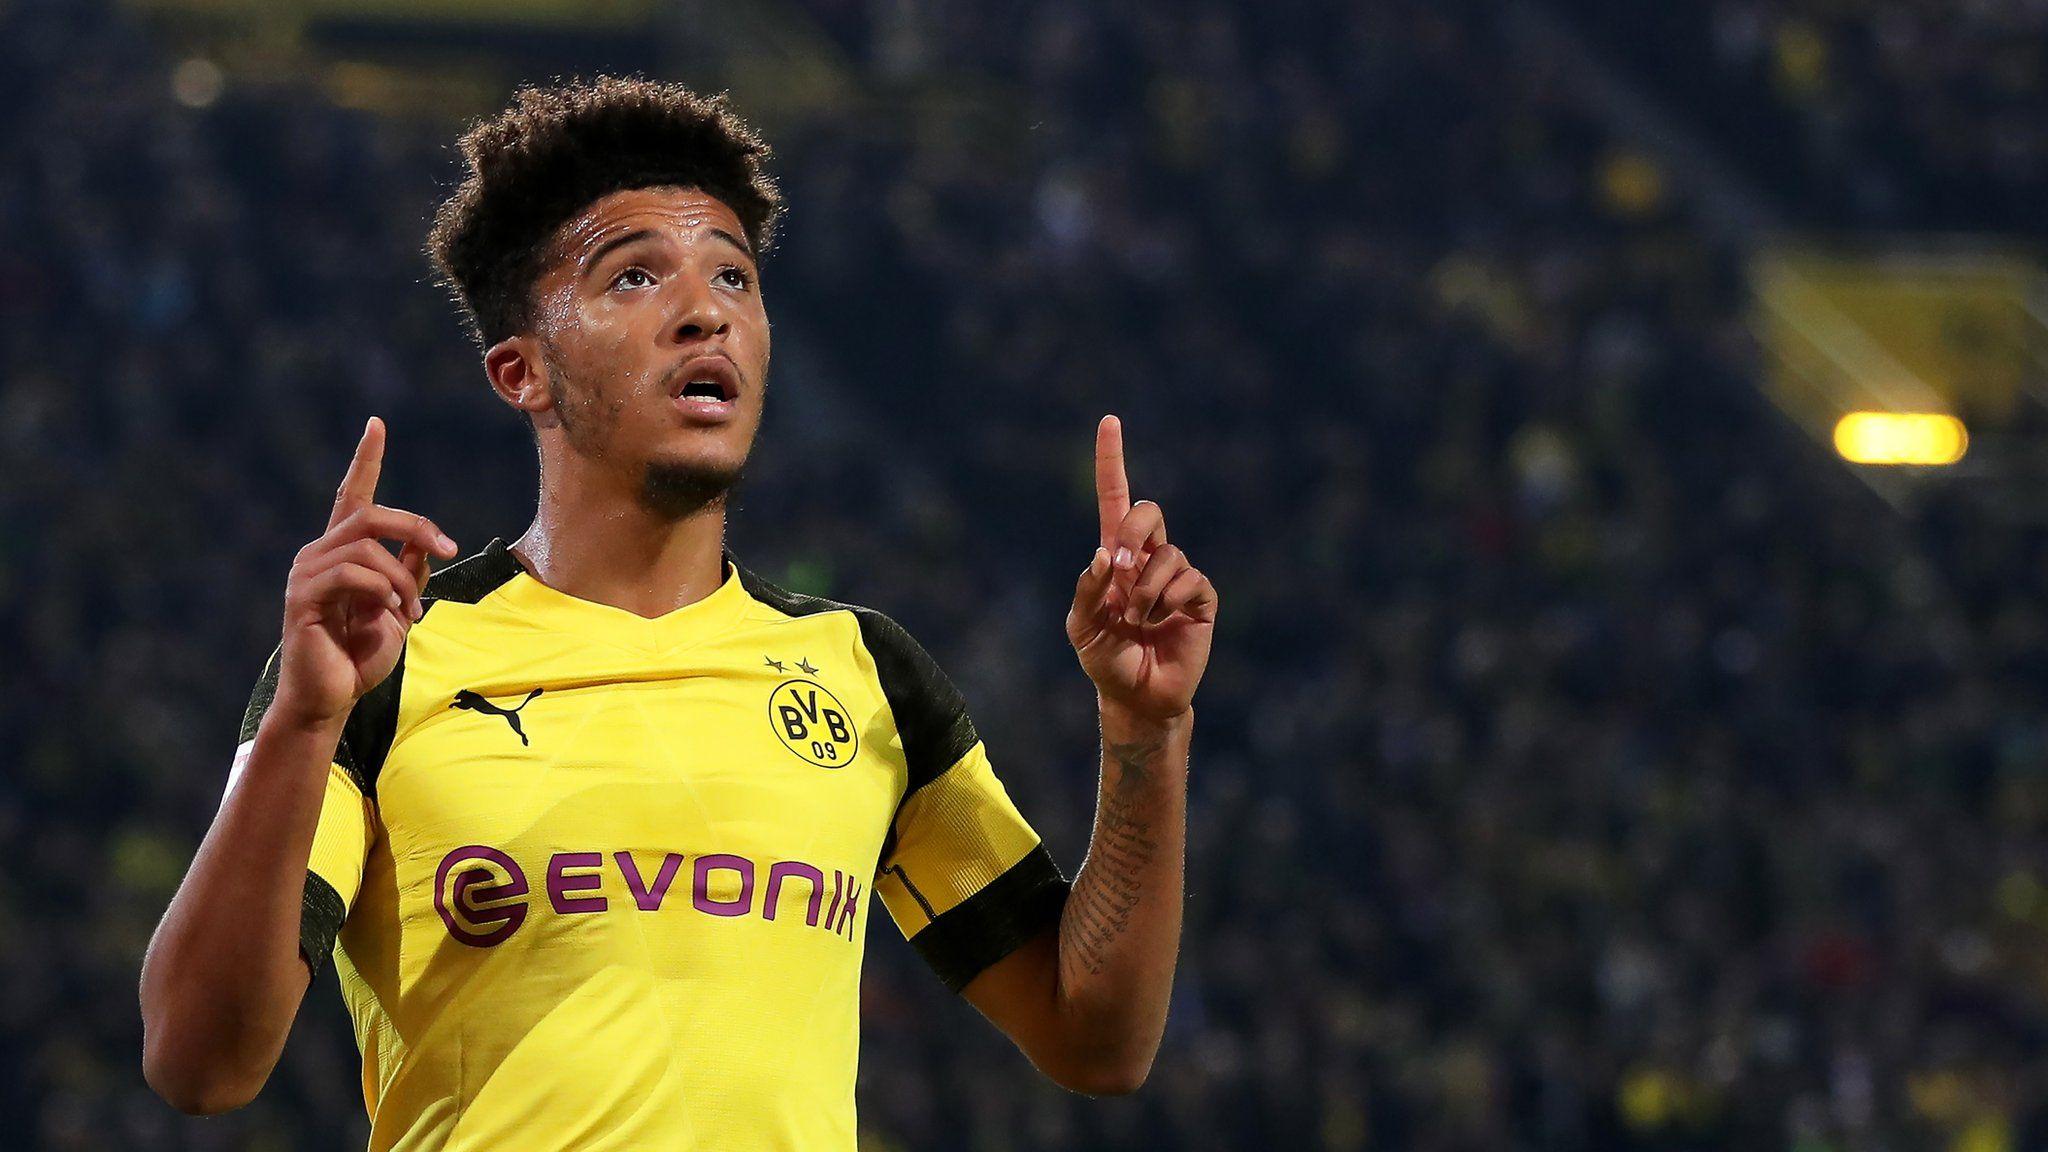 Jadon Sancho's path from Man City reserves to England squad